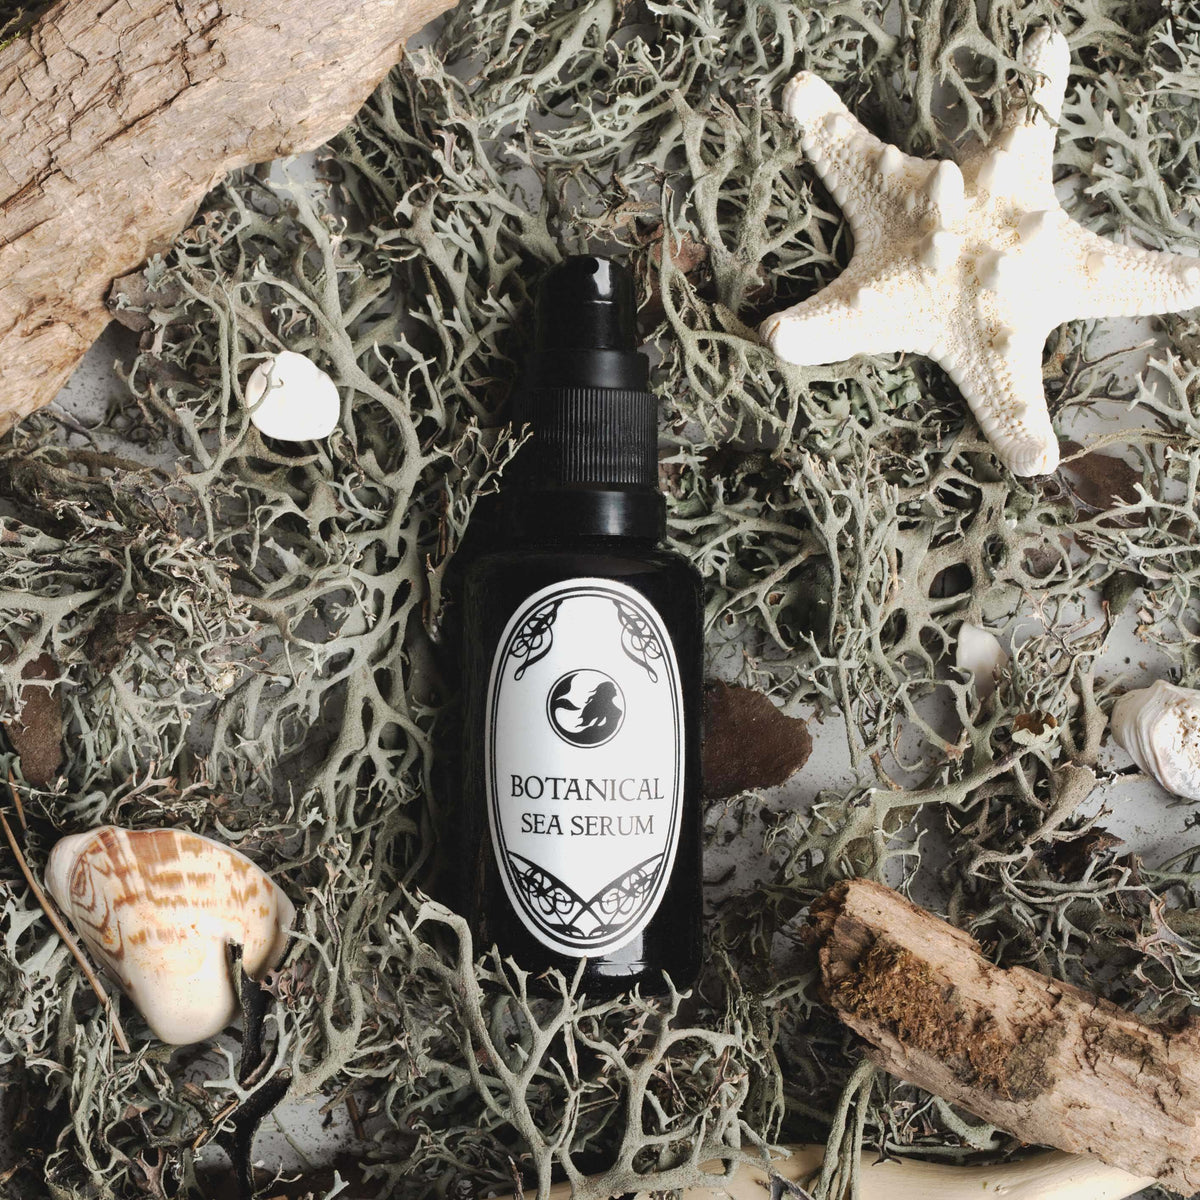 Dark purple 30ml bottle of Be Bohemian Botanical Sea Serum with pearlescent white label surrounded by seashells and branches laying on top of seaweed.